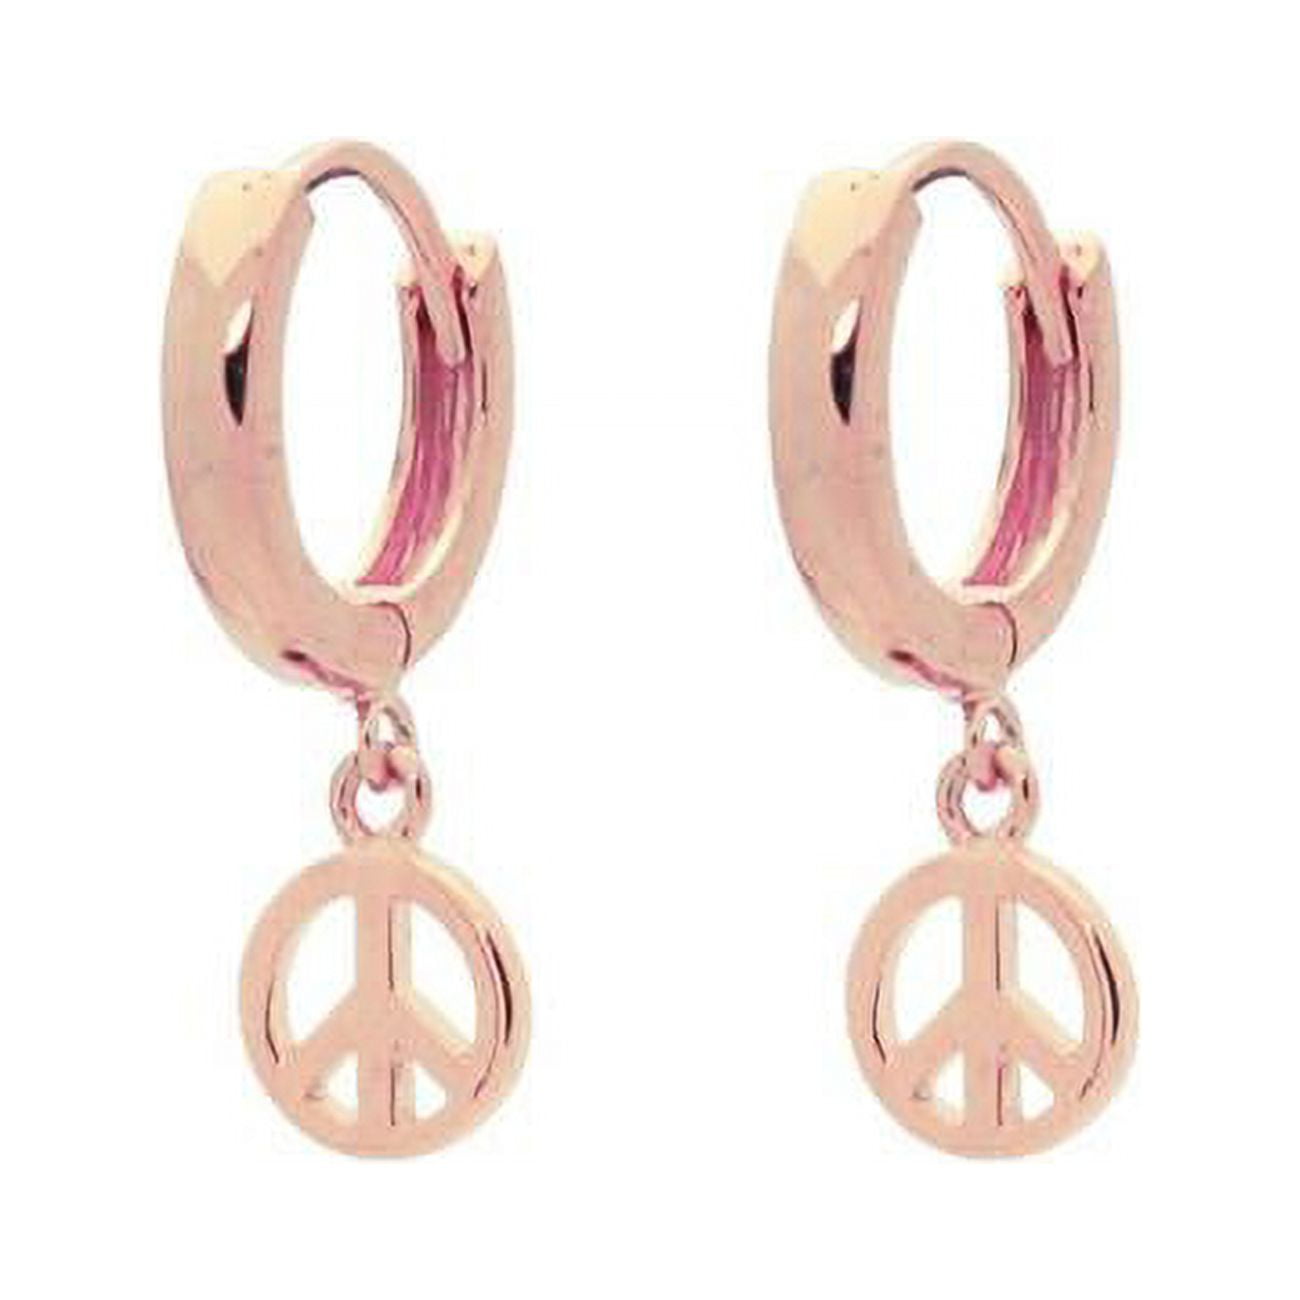 215264p Mini Huggie Girls Earrings Peace Sign In Pink Plated Sterling Silver